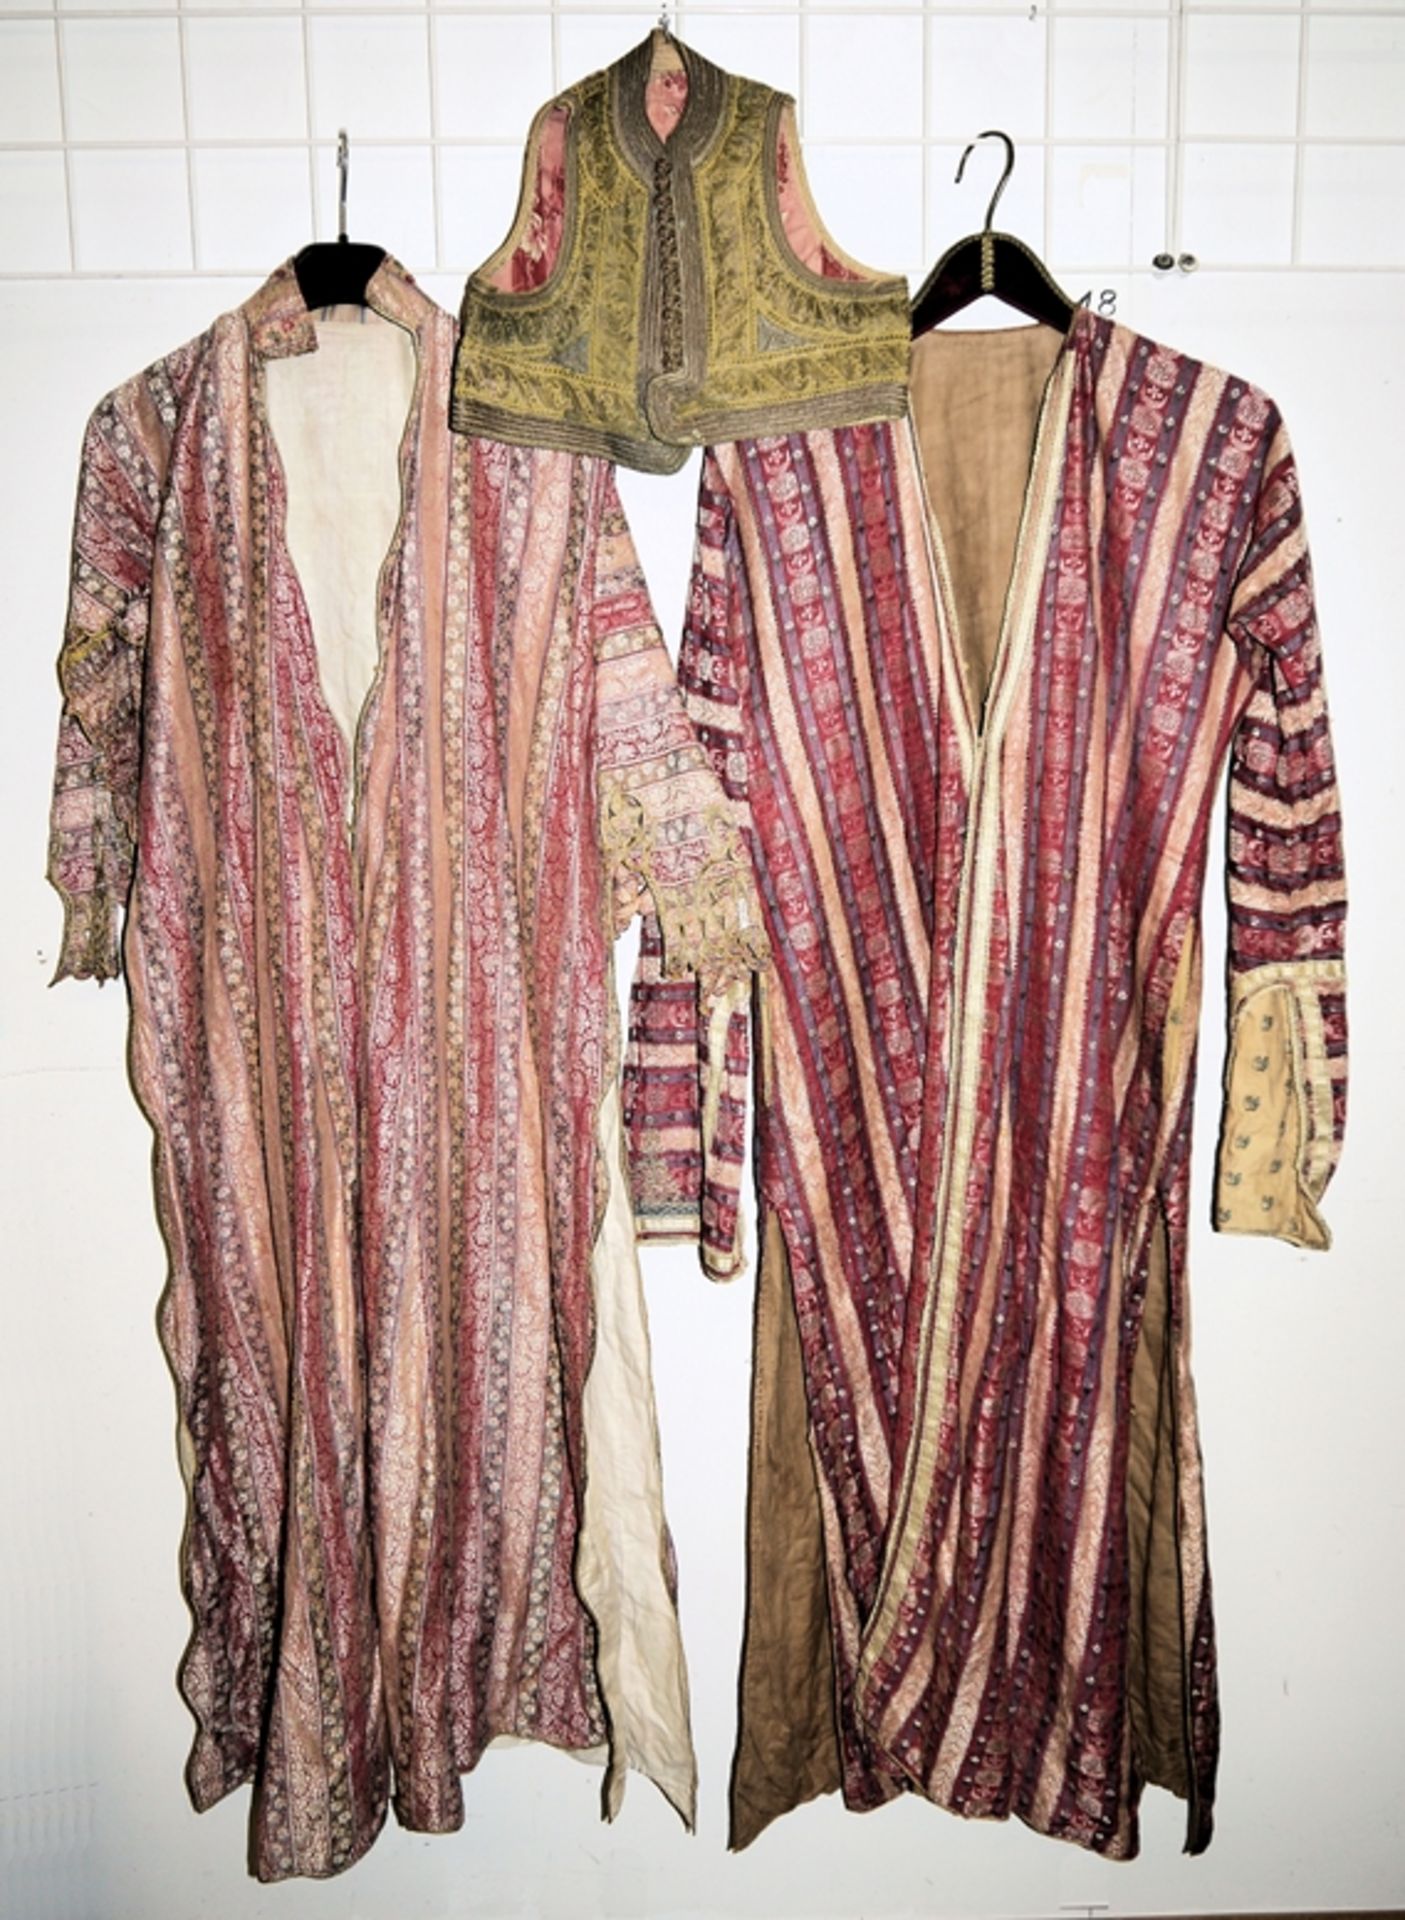 Two antique Indo-Pakistani silk caftans and a boy's waistcoat